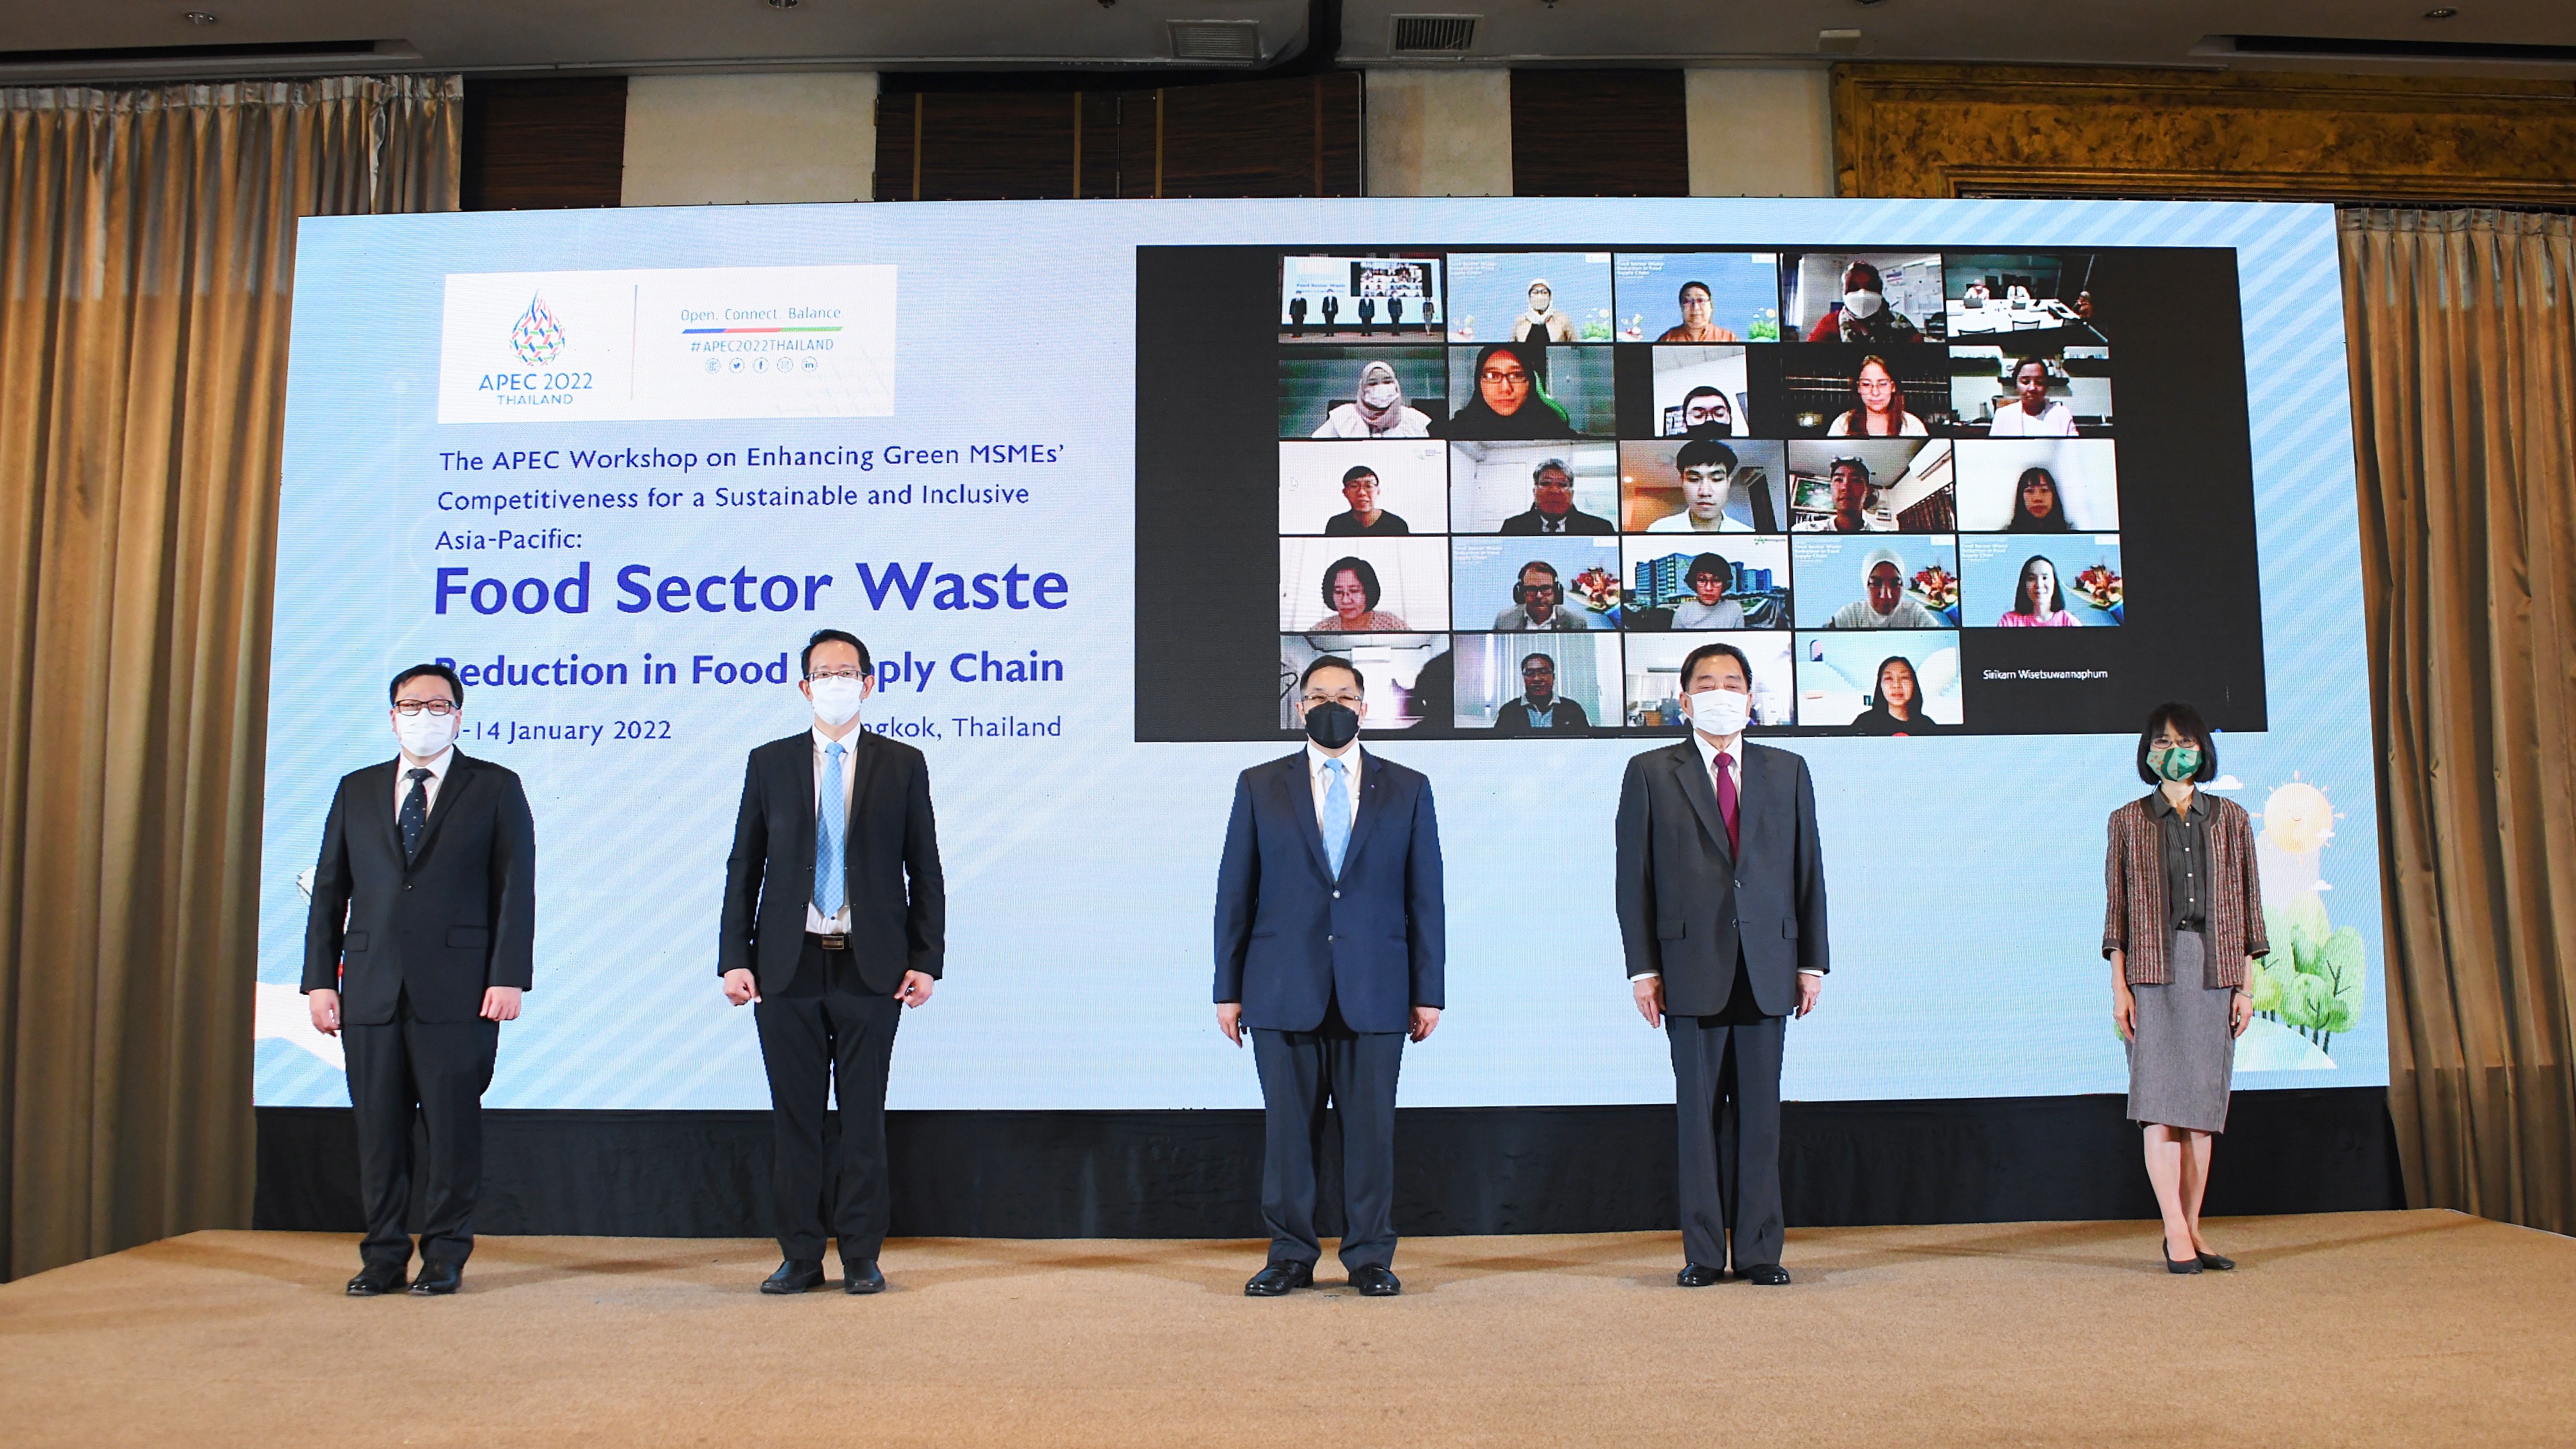 APEC 2022: Thailand to Enhance MSME’s Competitiveness through Food Sector Waste Reduction